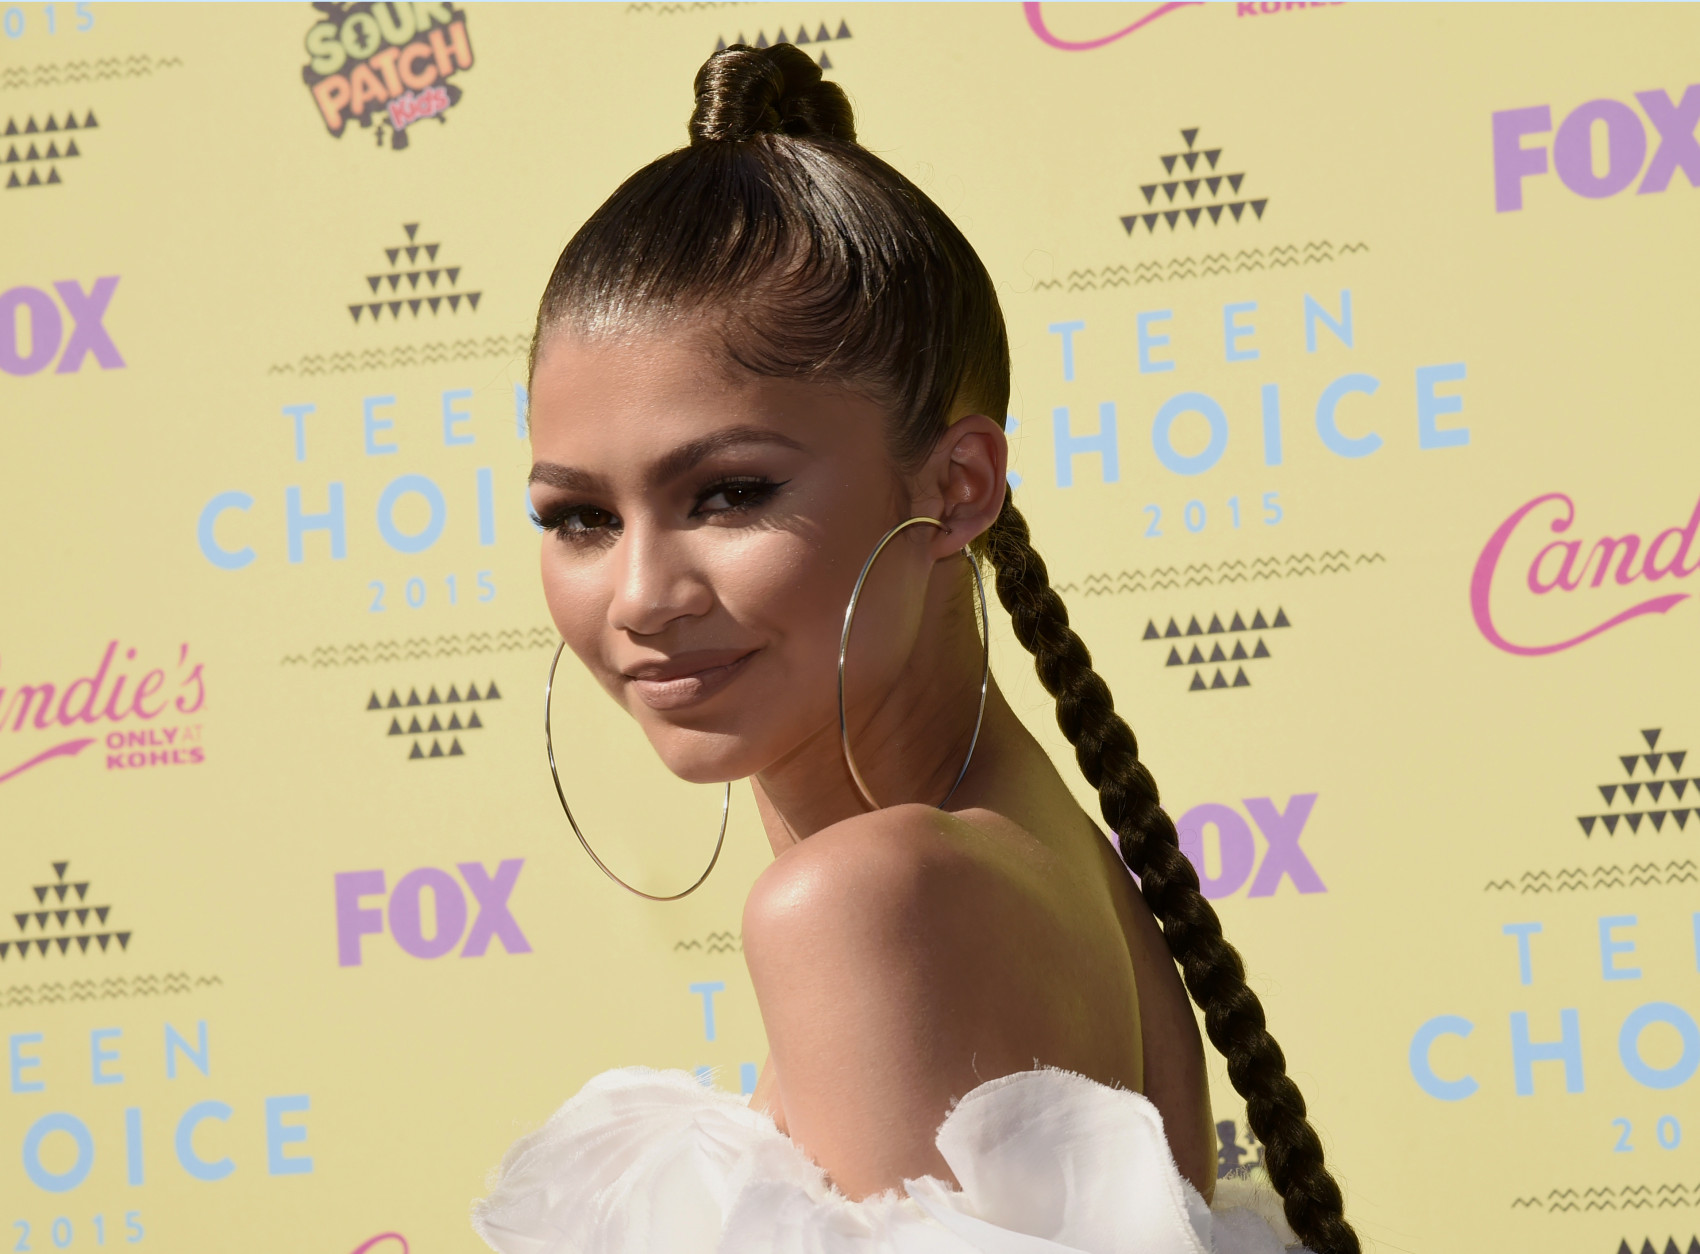 Zendaya arrives at the Teen Choice Awards at the Galen Center on Sunday, Aug. 16, 2015, in Los Angeles. (Photo by Chris Pizzello/Invision/AP)